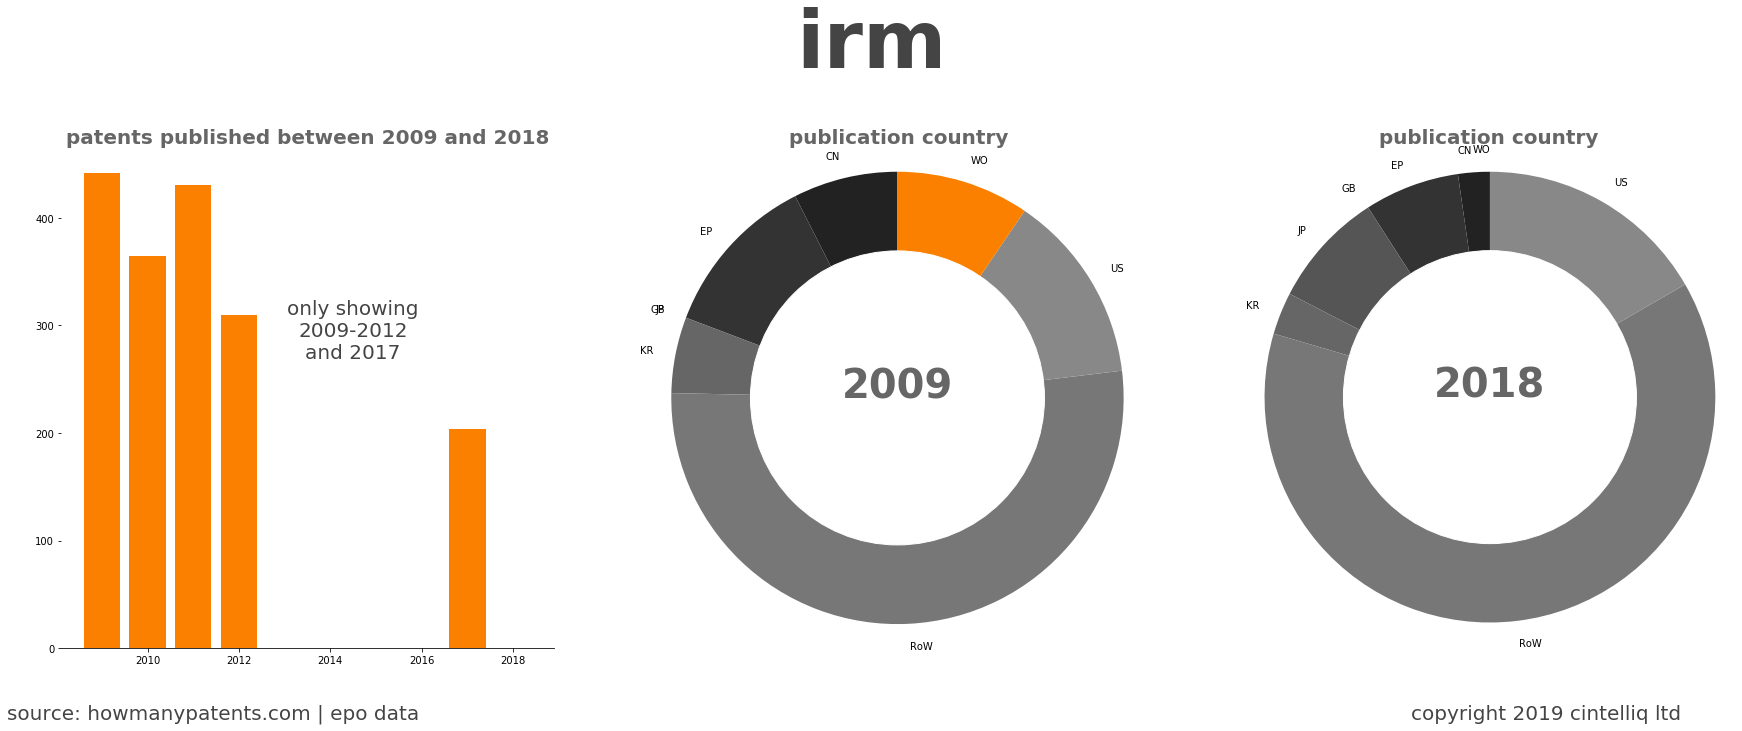 summary of patents for Irm